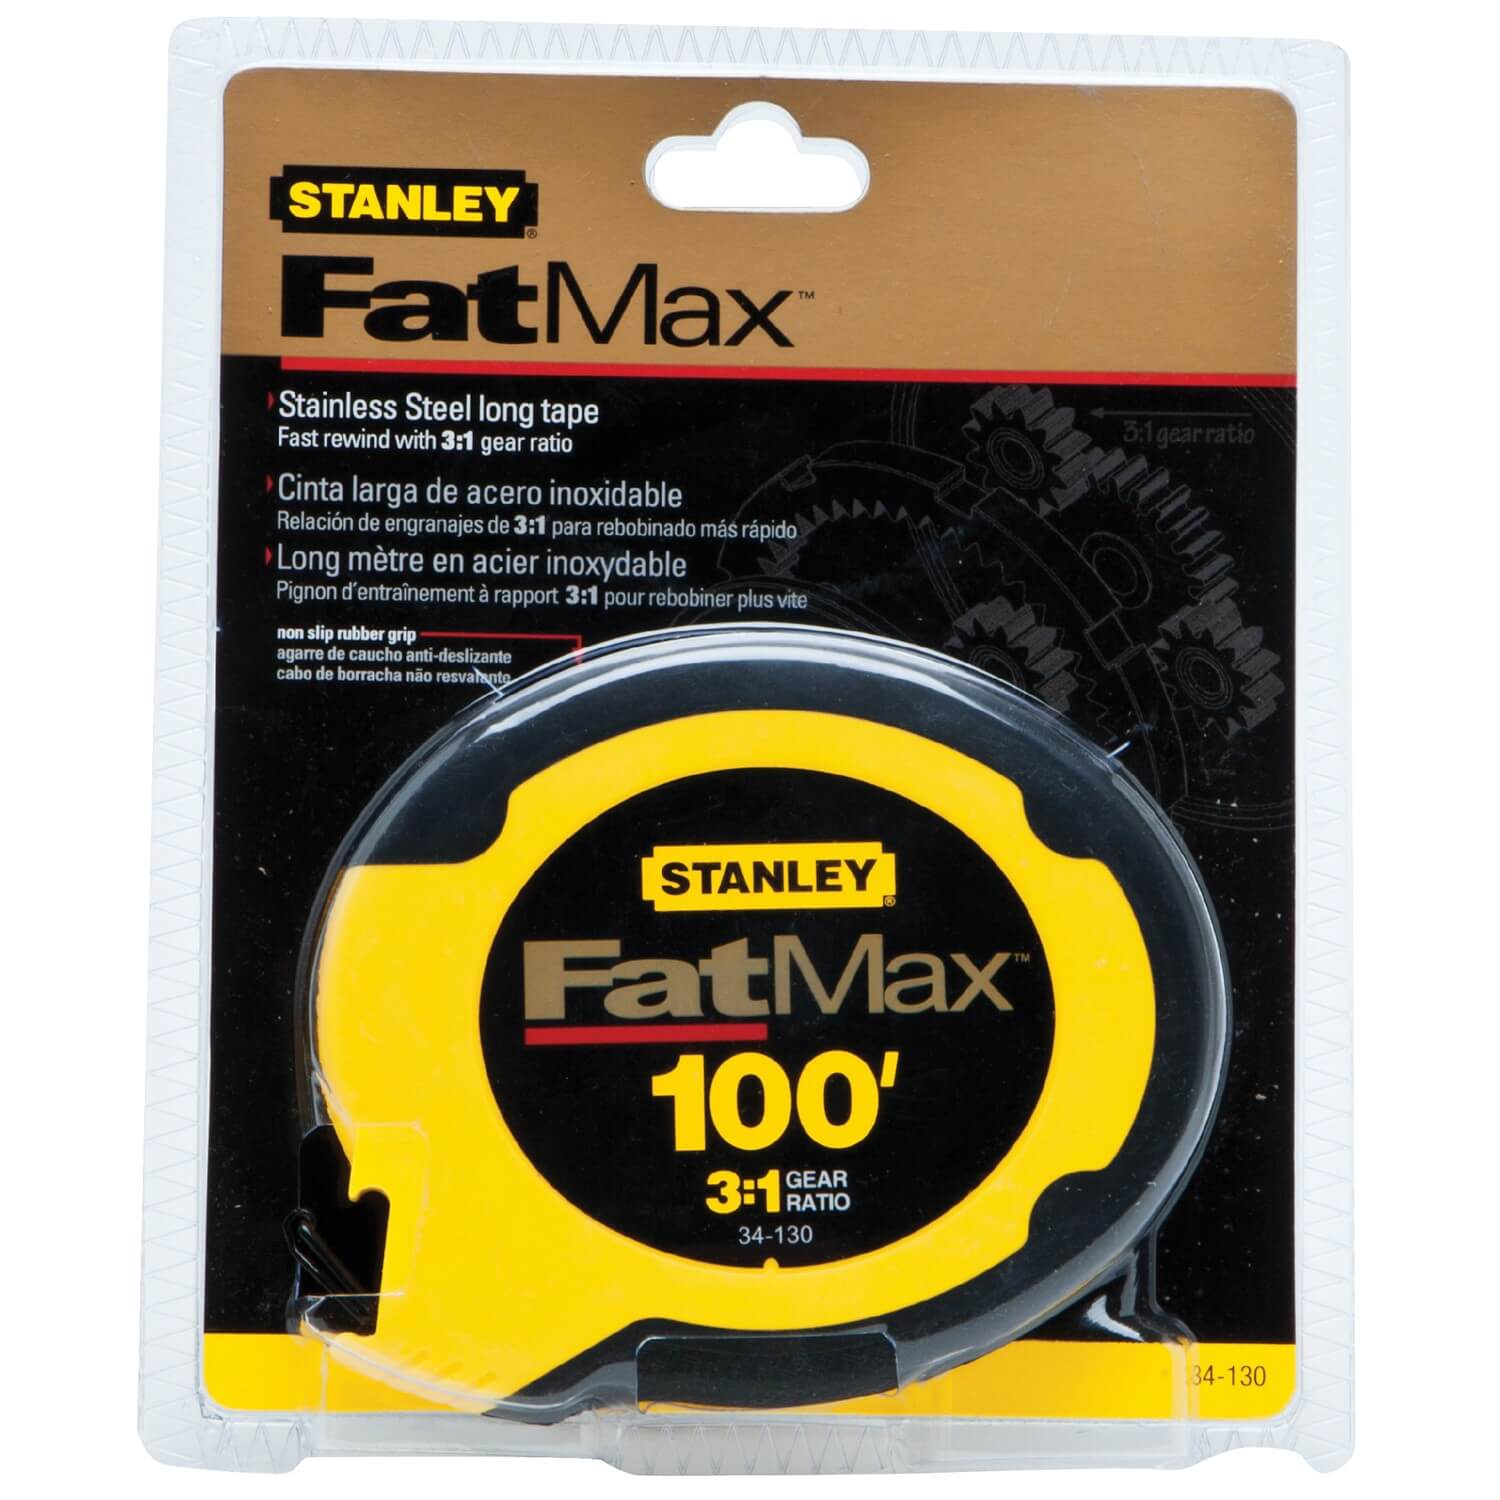 Stanley 34-130 - 100' Fatmax Tape - wise-line-tools